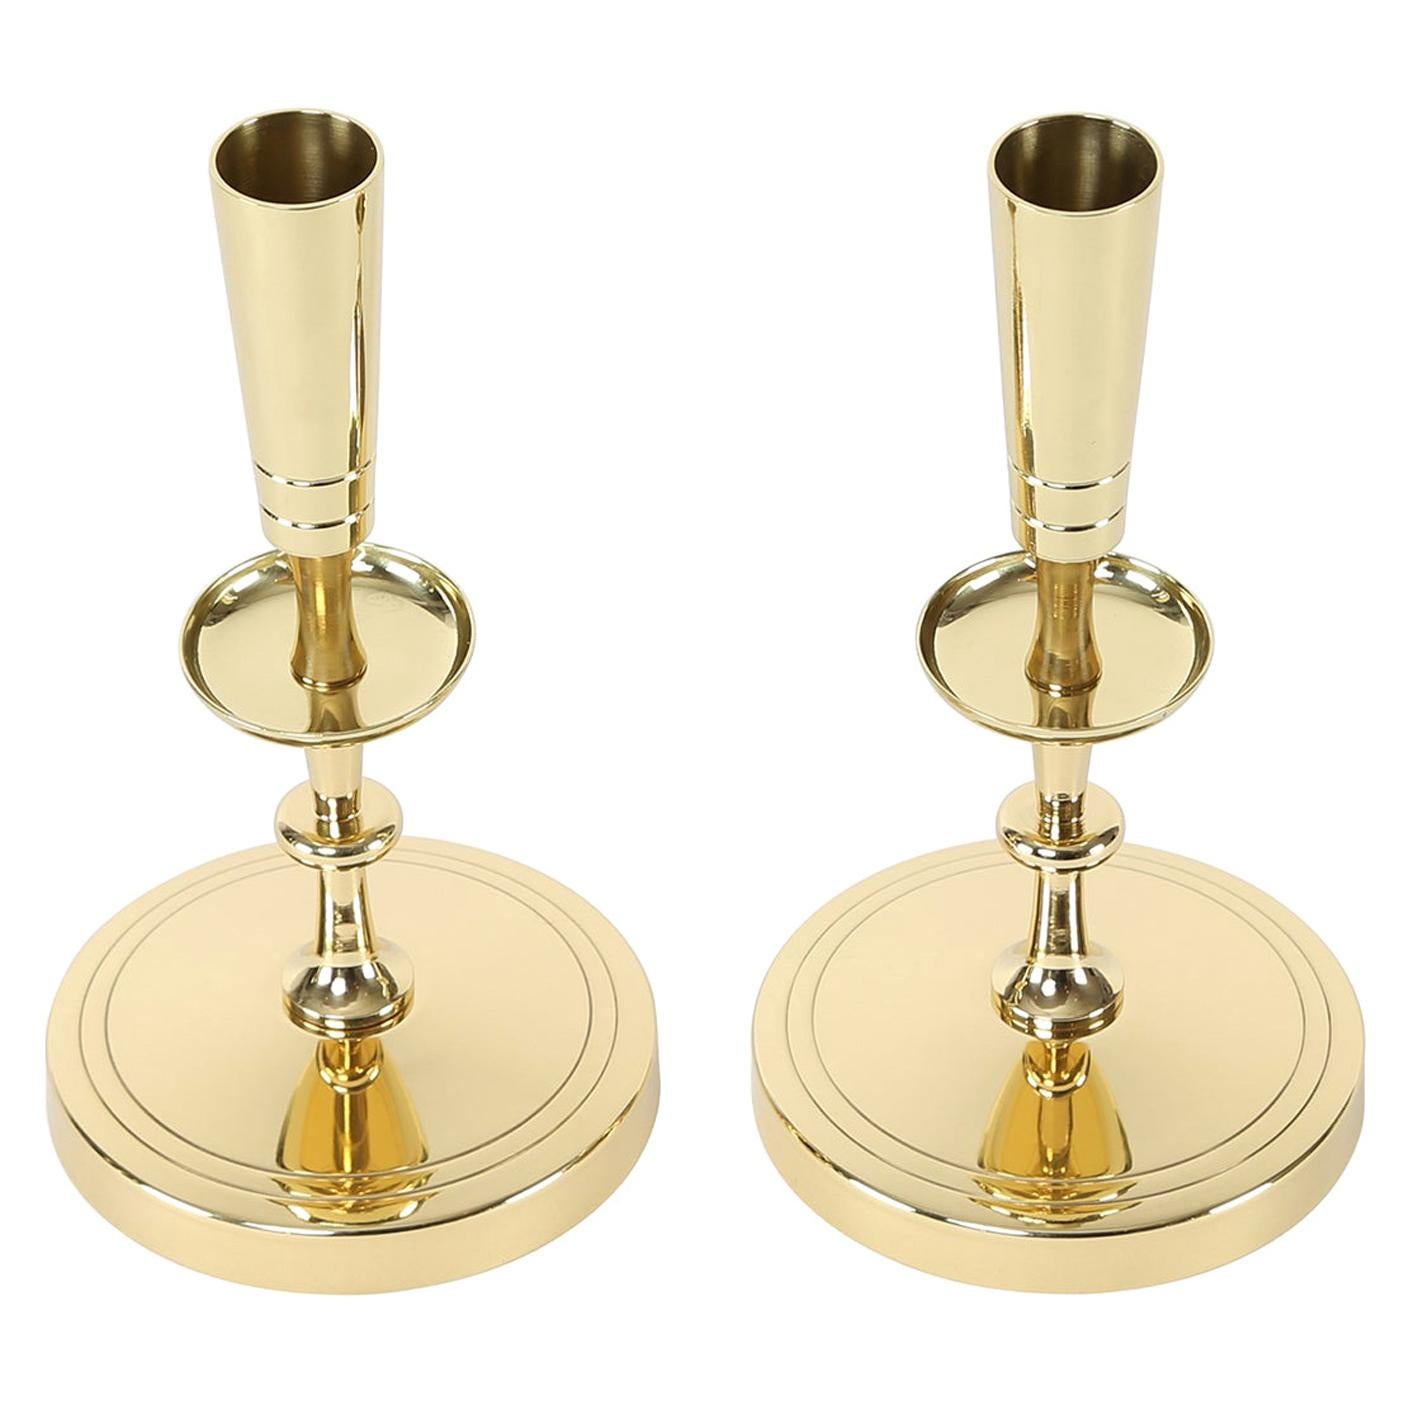 Tommi Parzinger Pair of Candelabra in Polished Brass, 1950s, 'Signed'